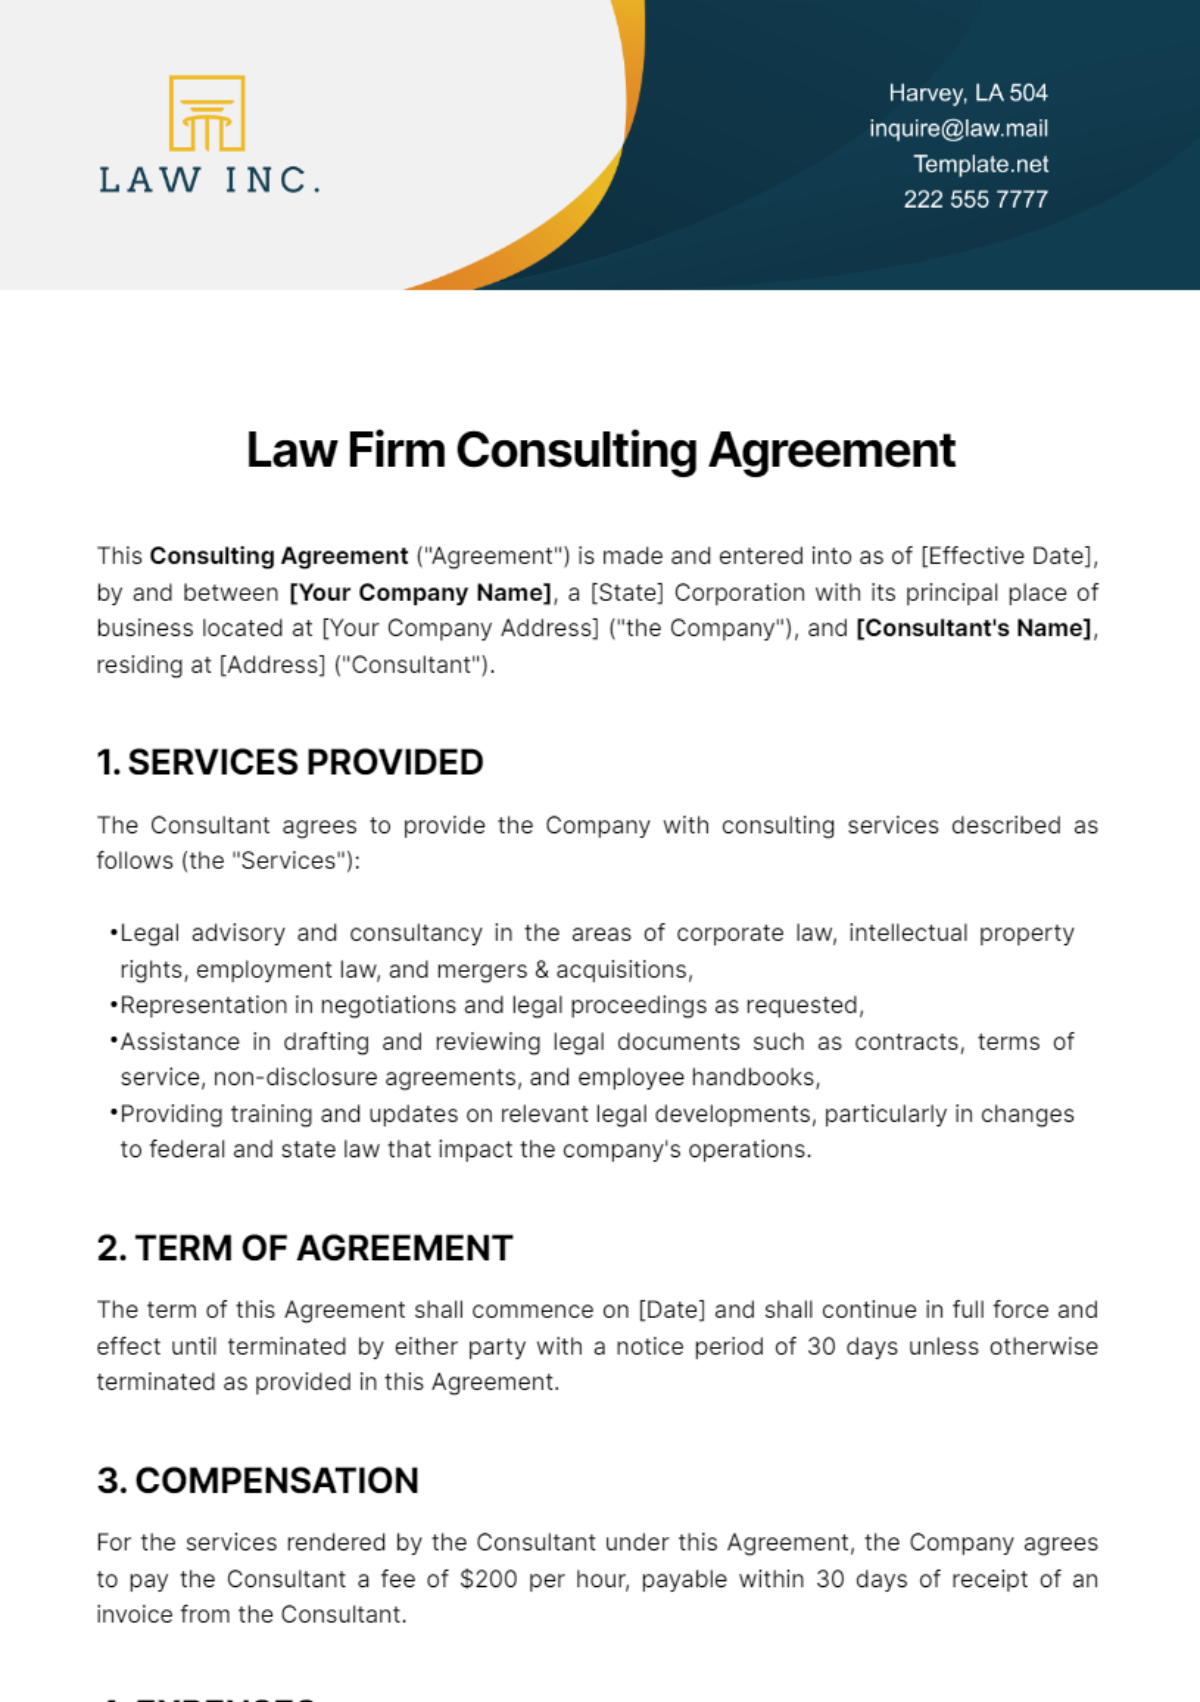 Law Firm Consulting Agreement Template